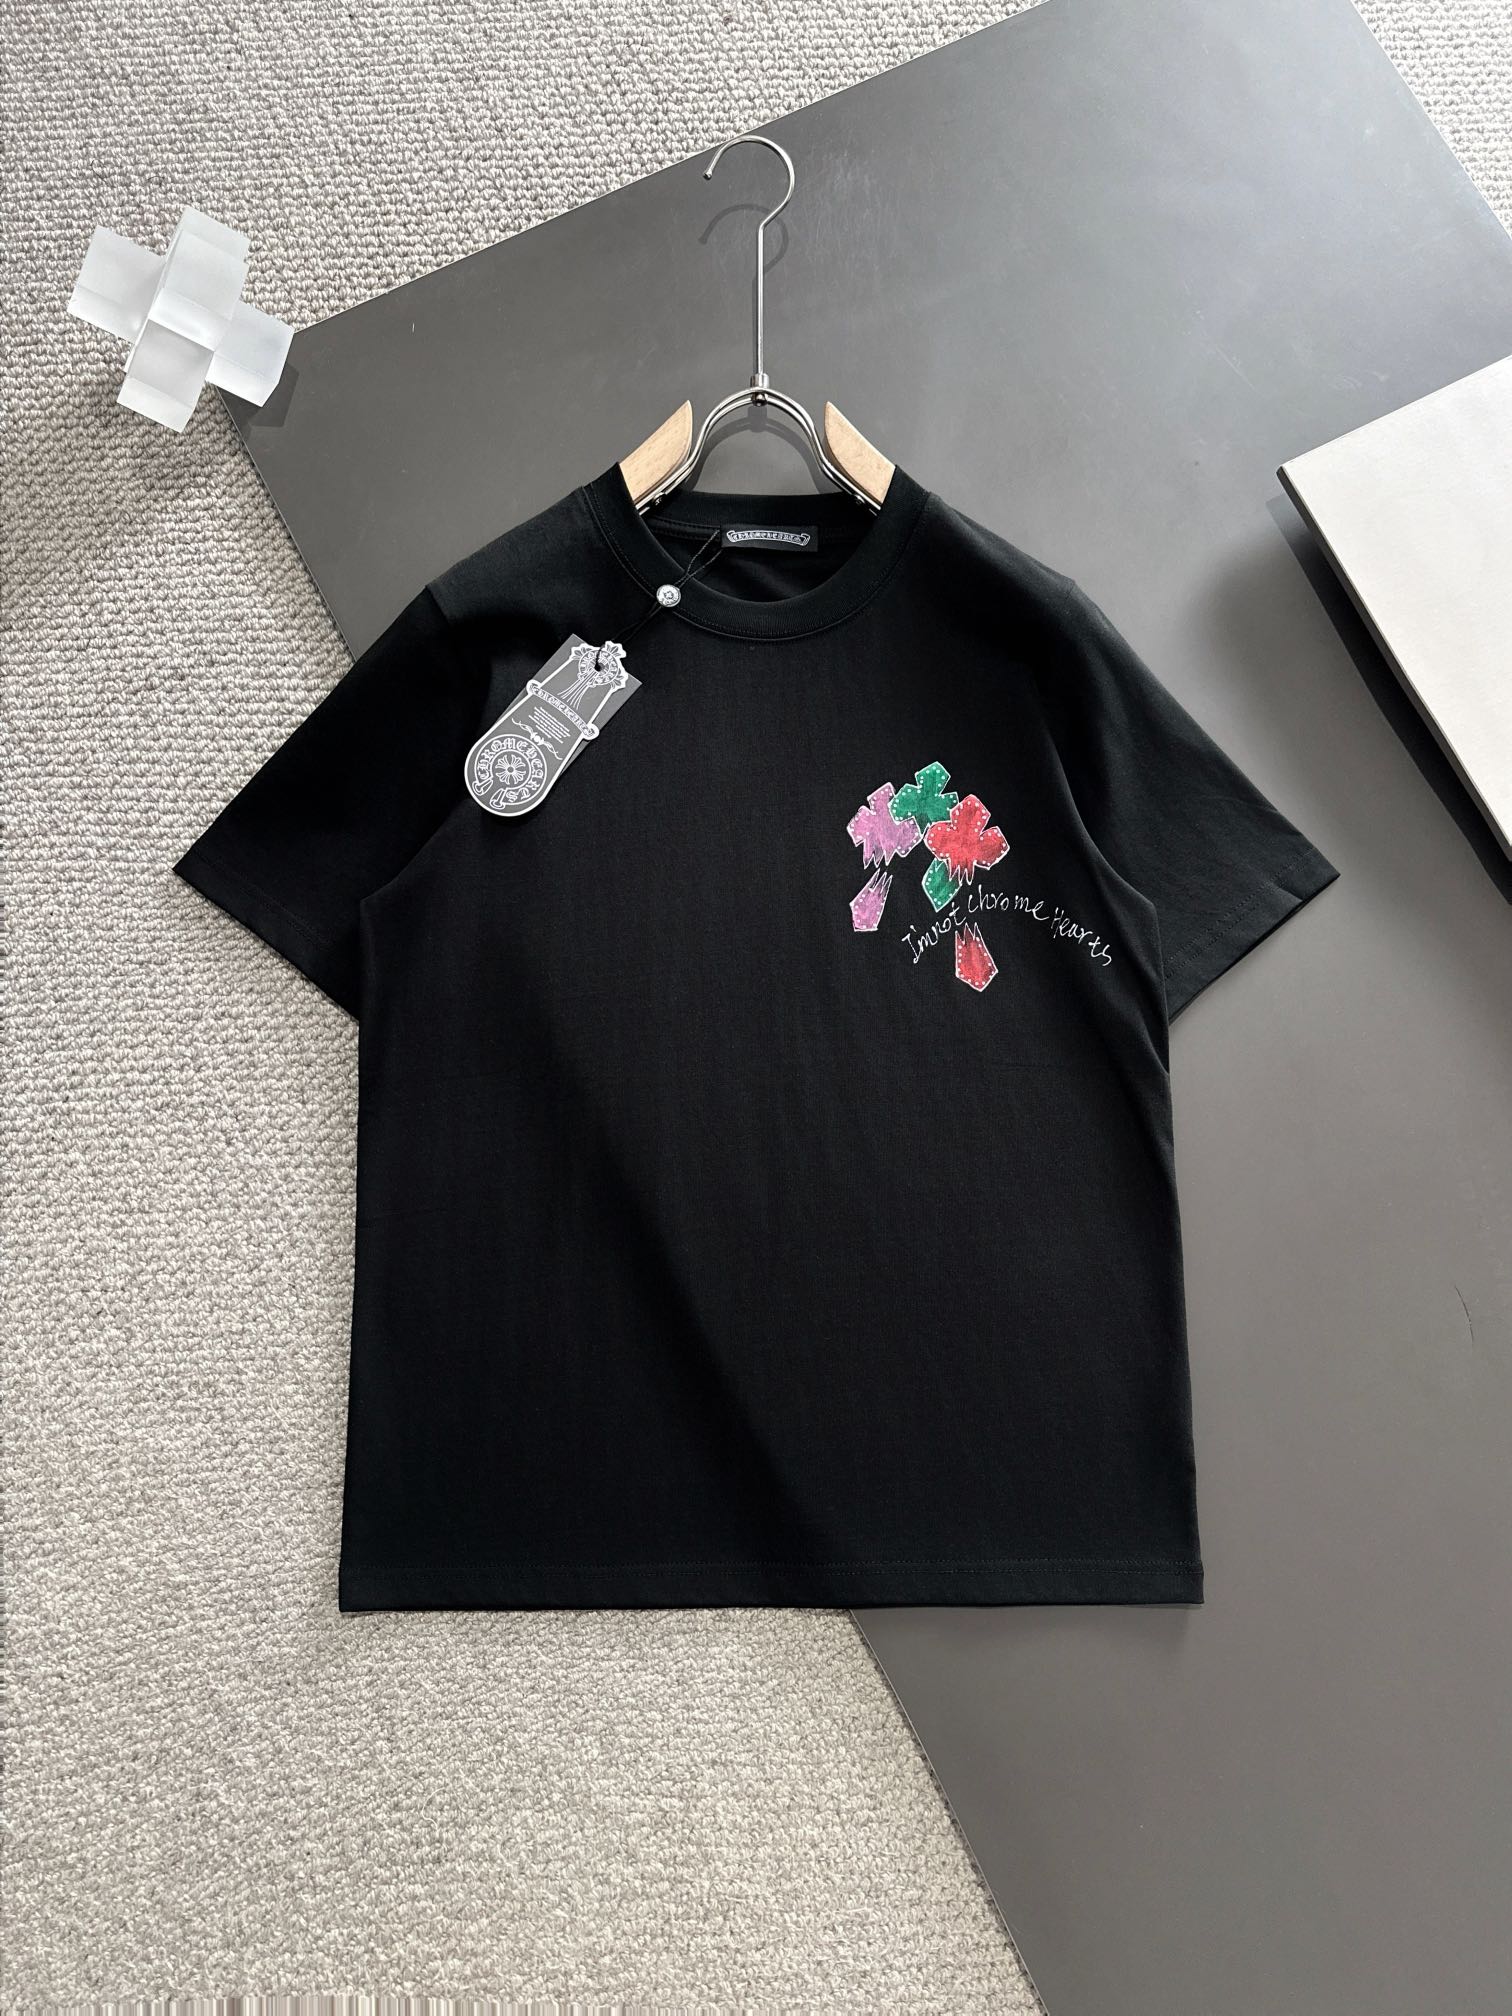 Chrome Hearts Clothing T-Shirt Black White Spring/Summer Collection Fashion Short Sleeve